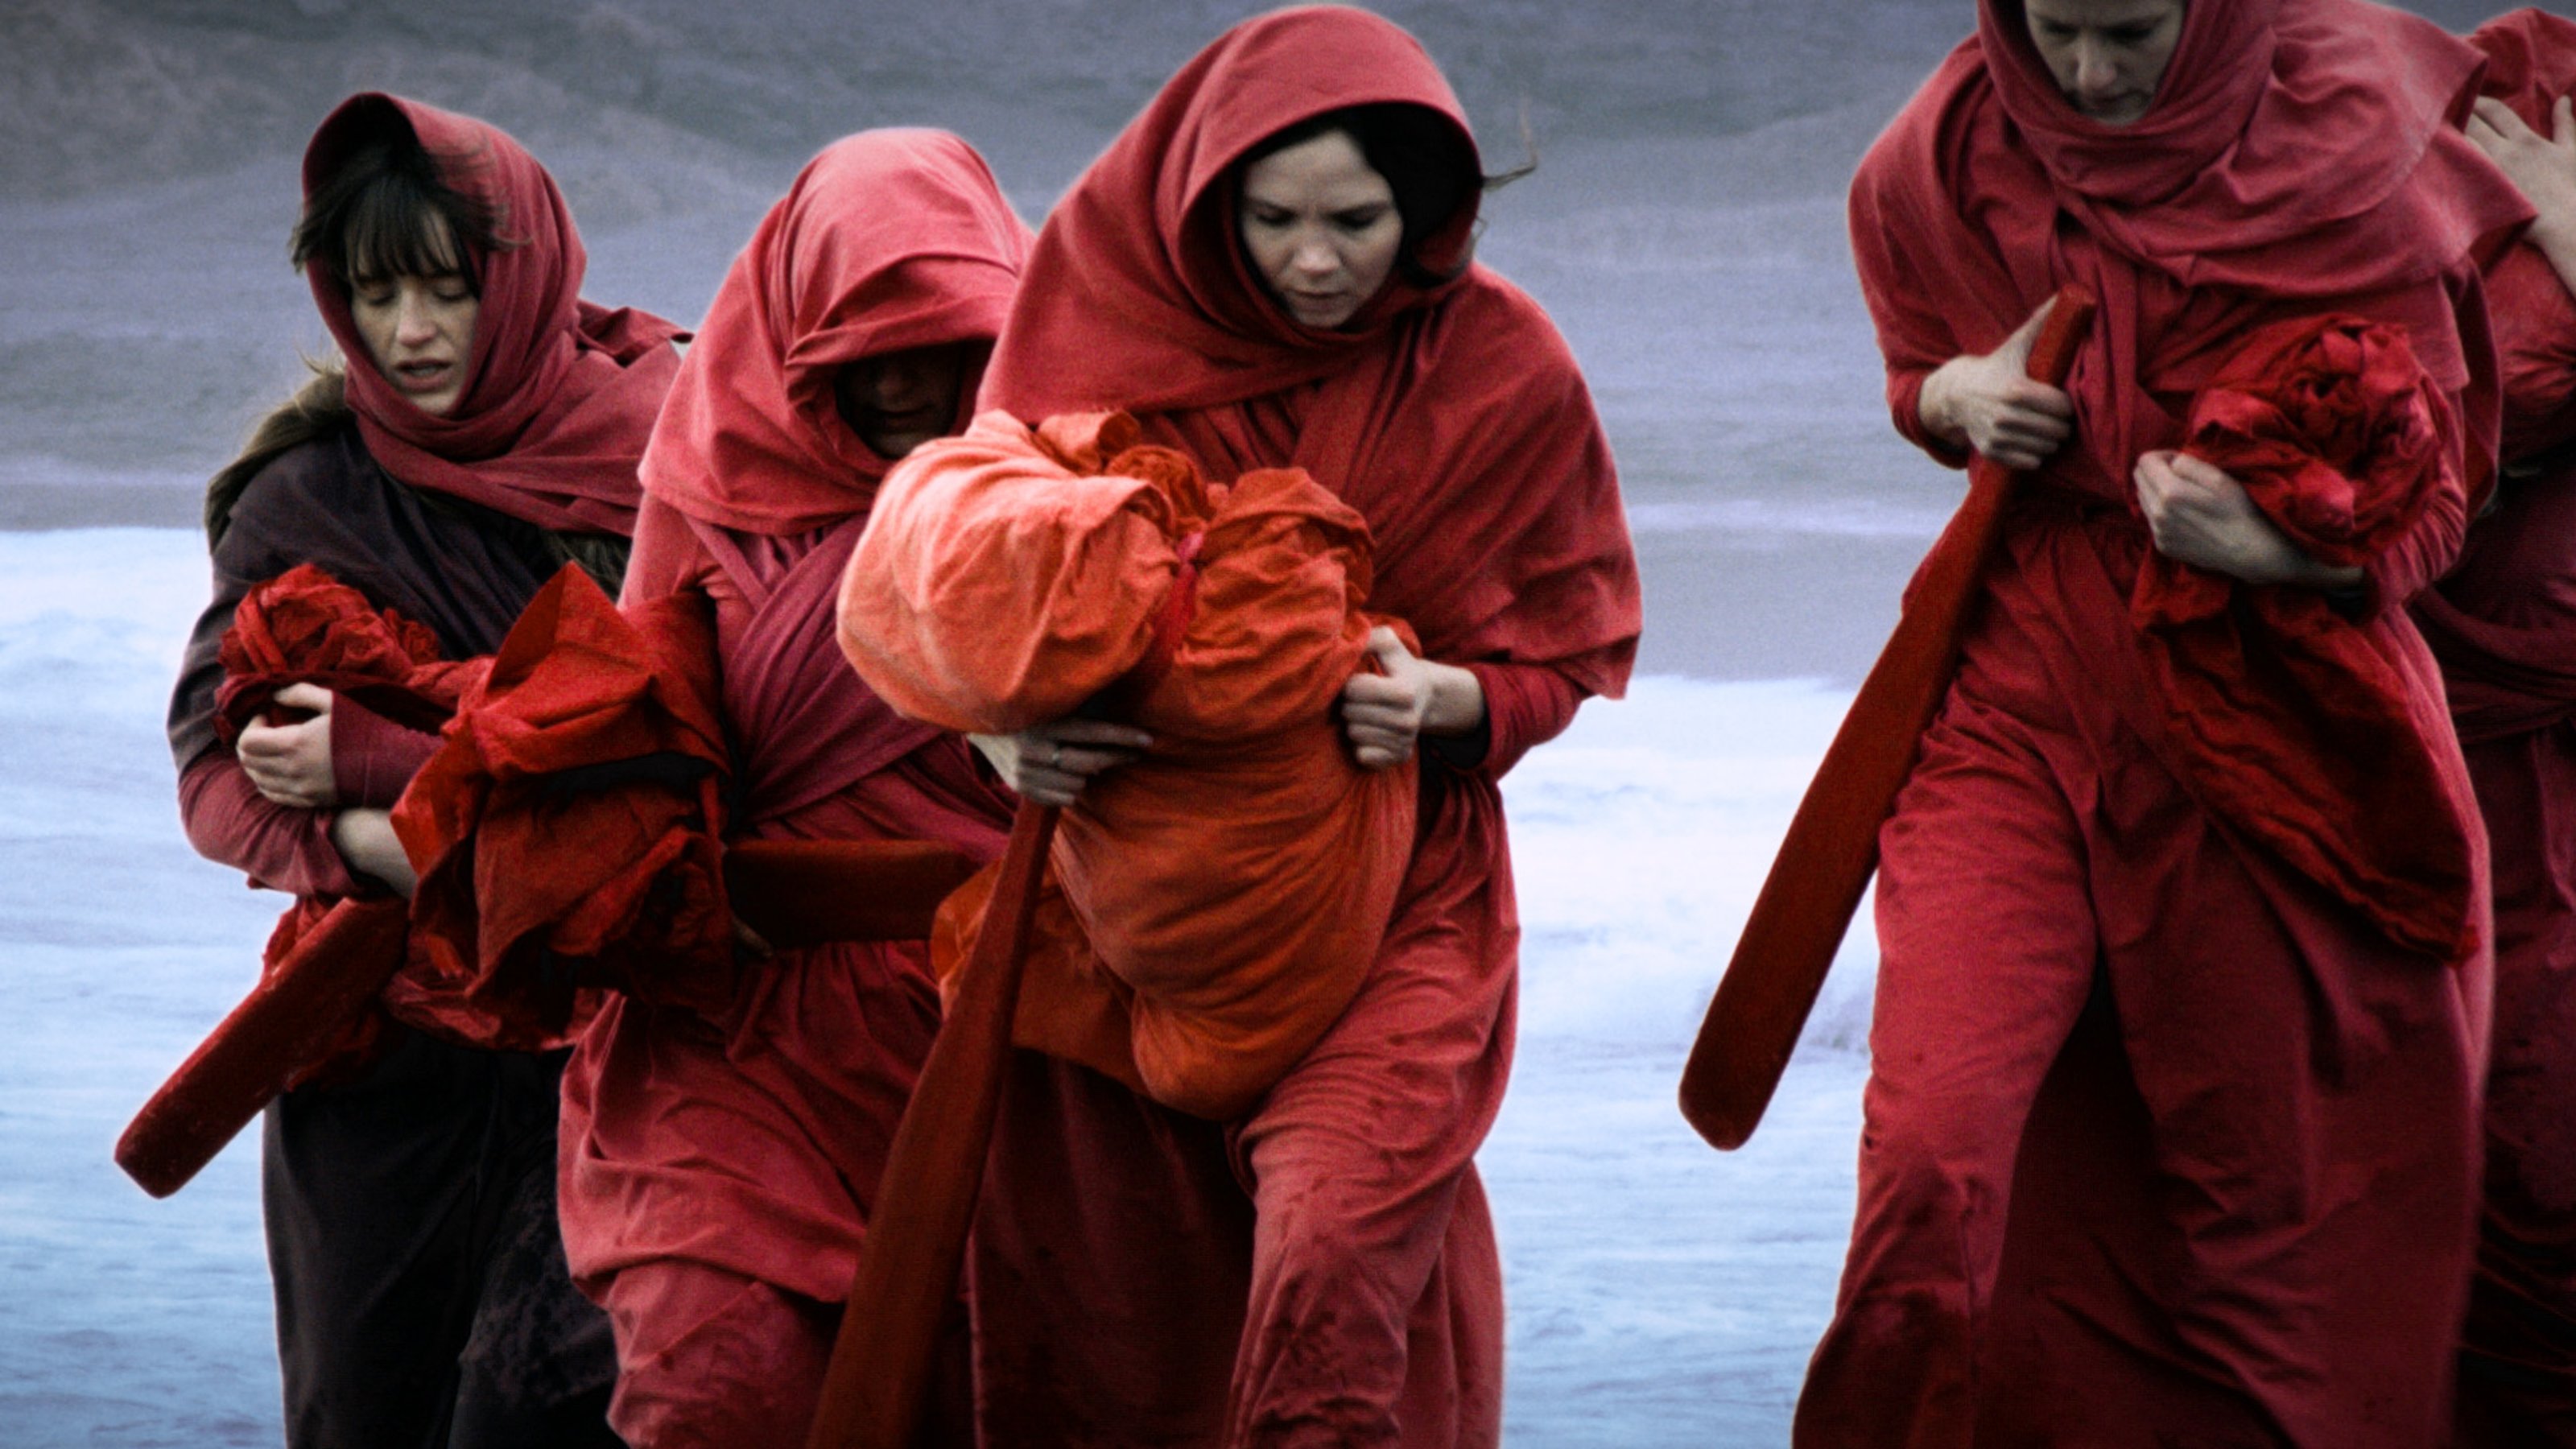 A group of women holding cloths walking on the shore against the wind